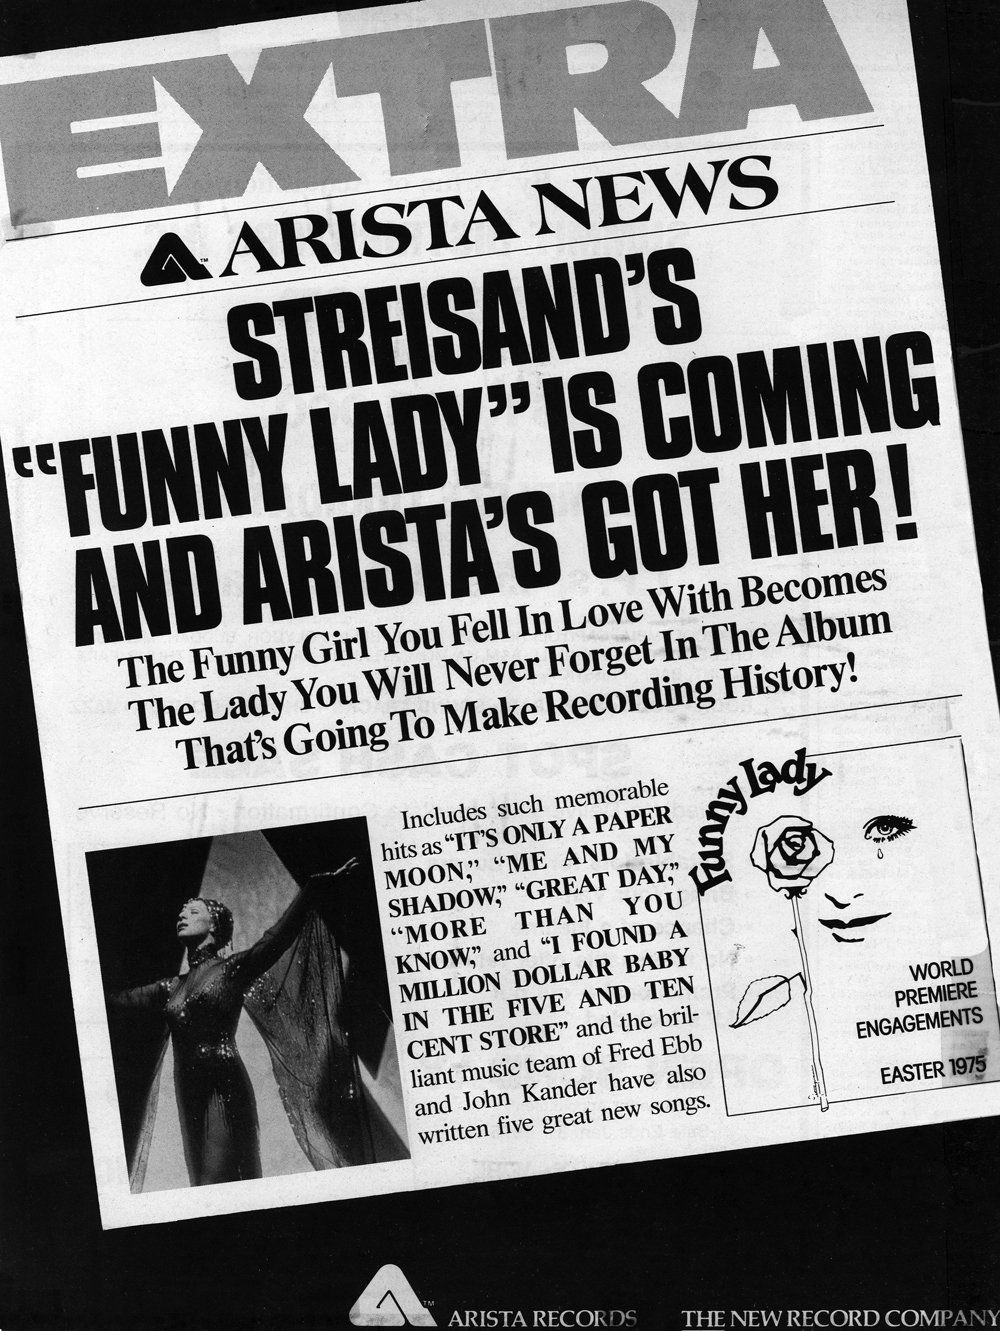 Ad for Funny Lady soundtrack on Arista Records.